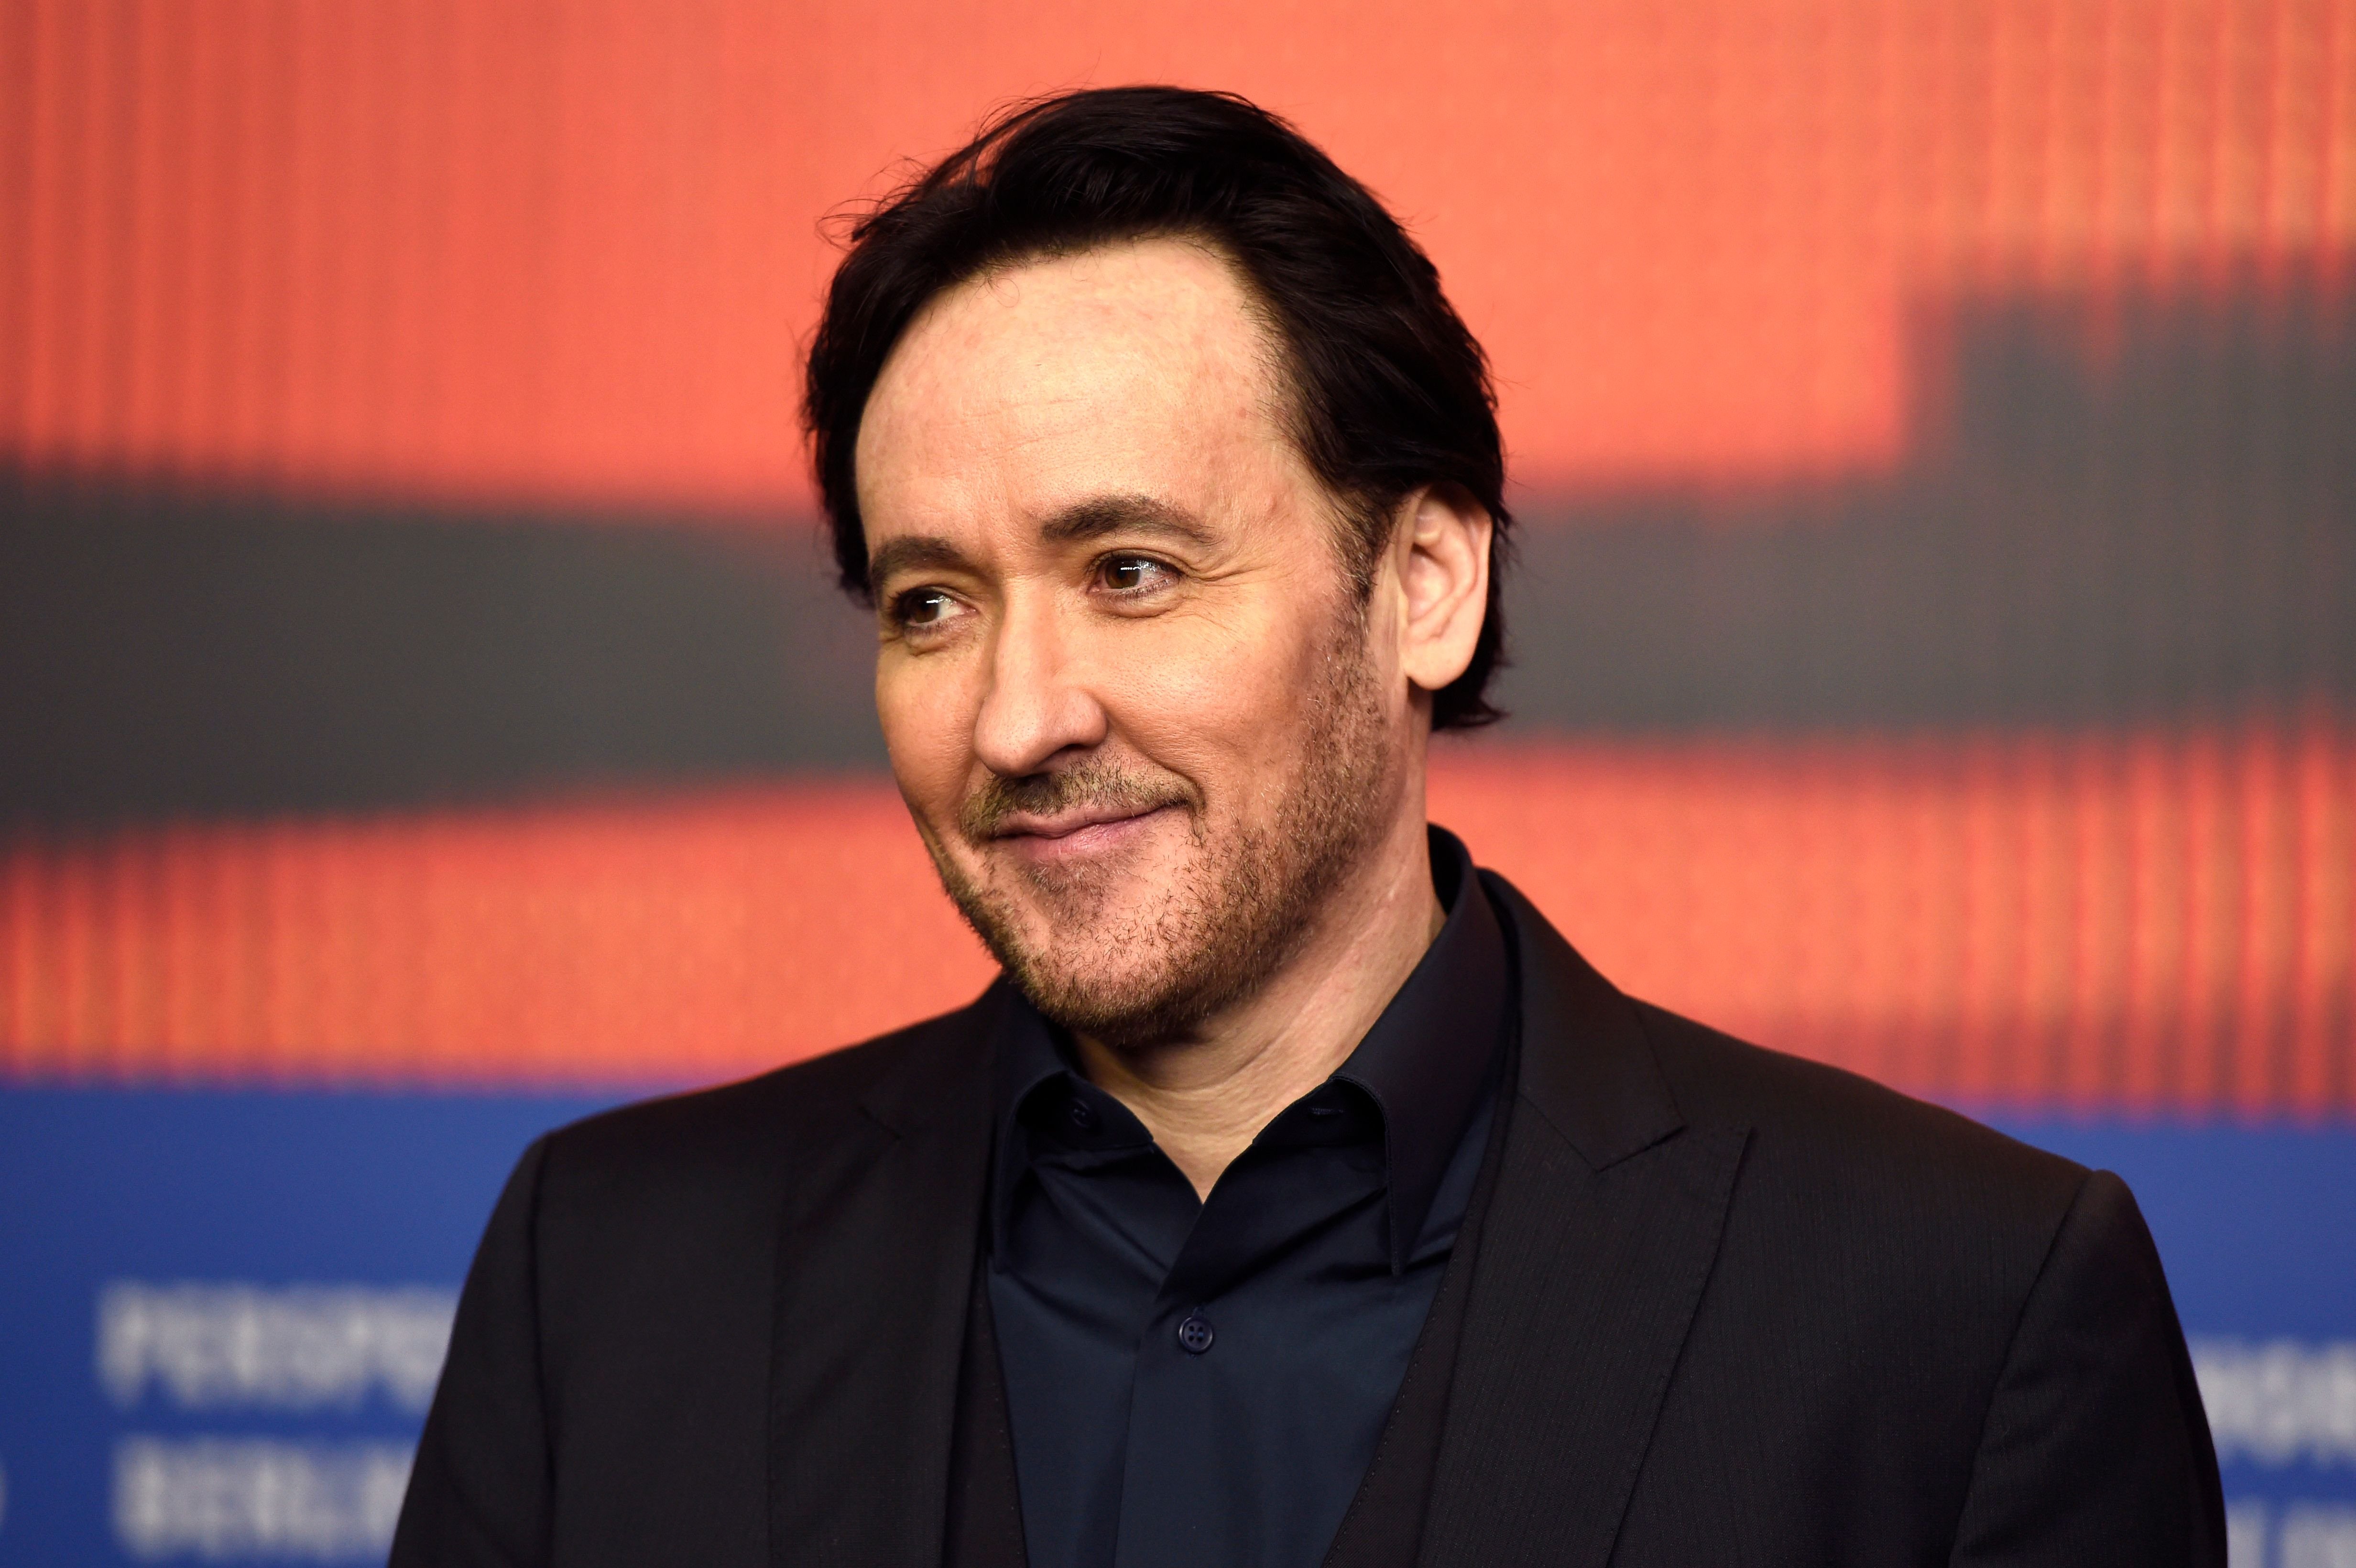 John Cusack during a press conference at the 66th Berlin International Film Festival in 2016. | Source: Getty Images